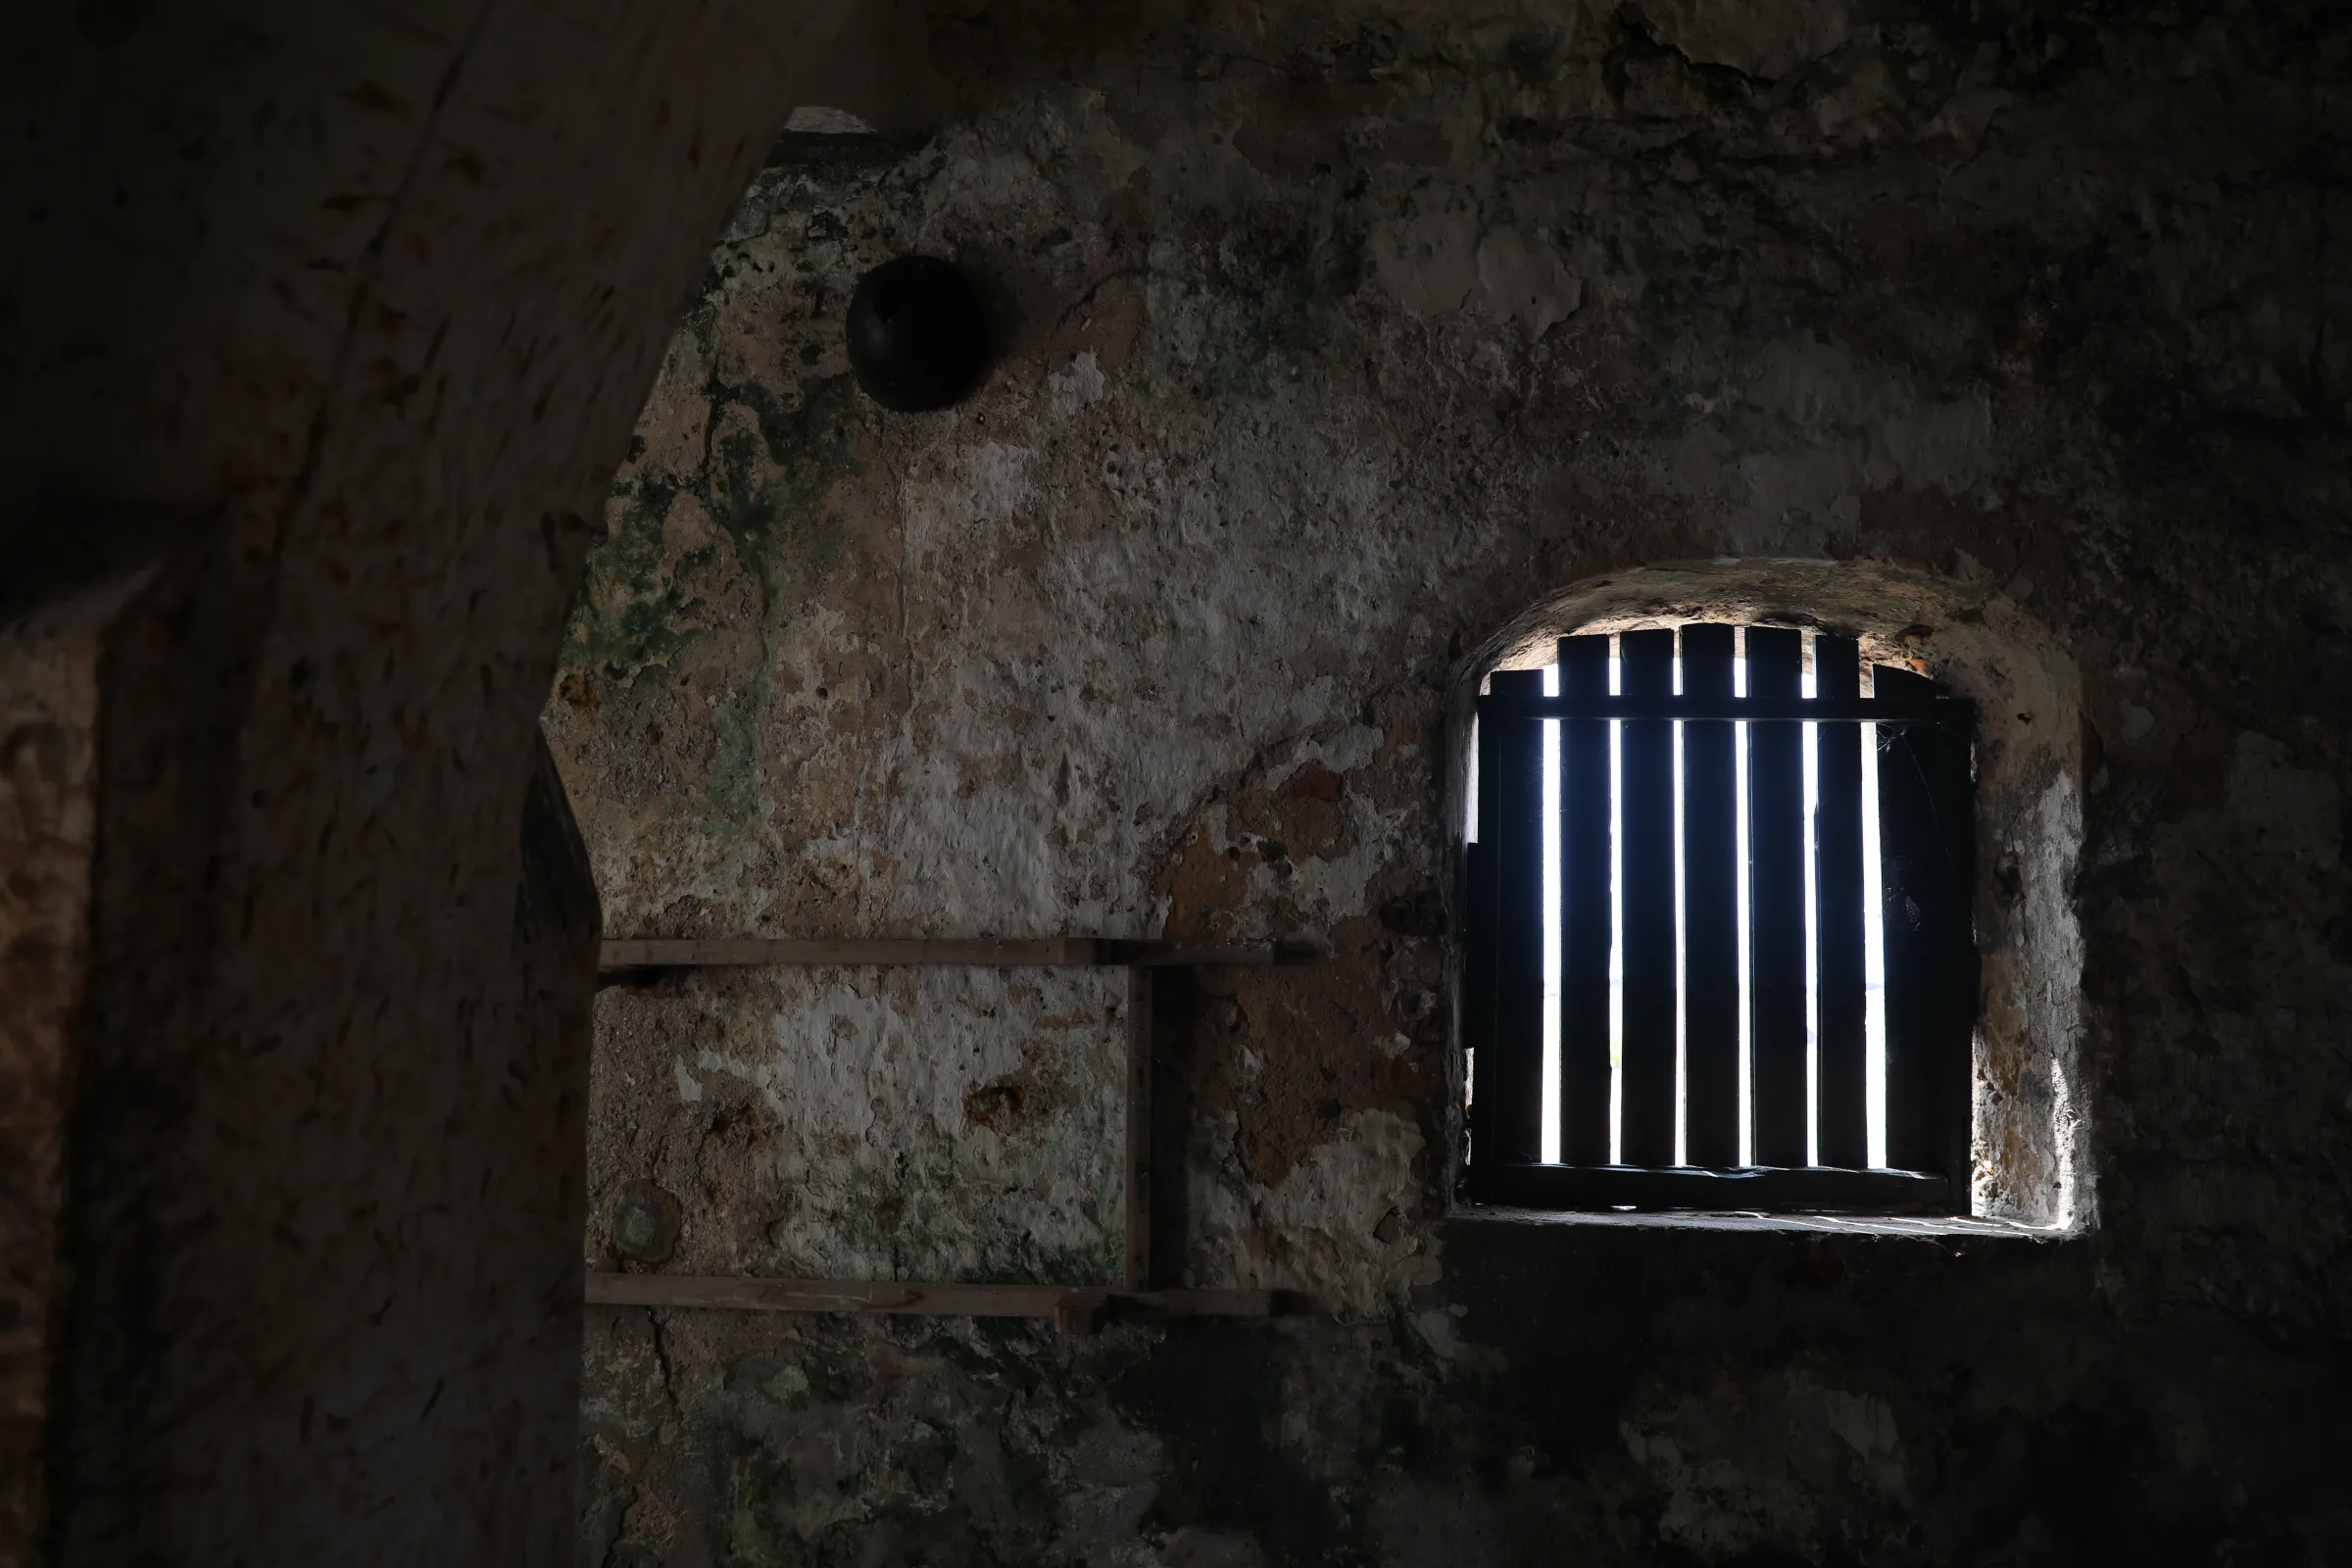 A window in a slave holding cell in Fort Prinzenstein, an 18th century slave-holding depot, in Keta, Ghana. August 8, 2022.